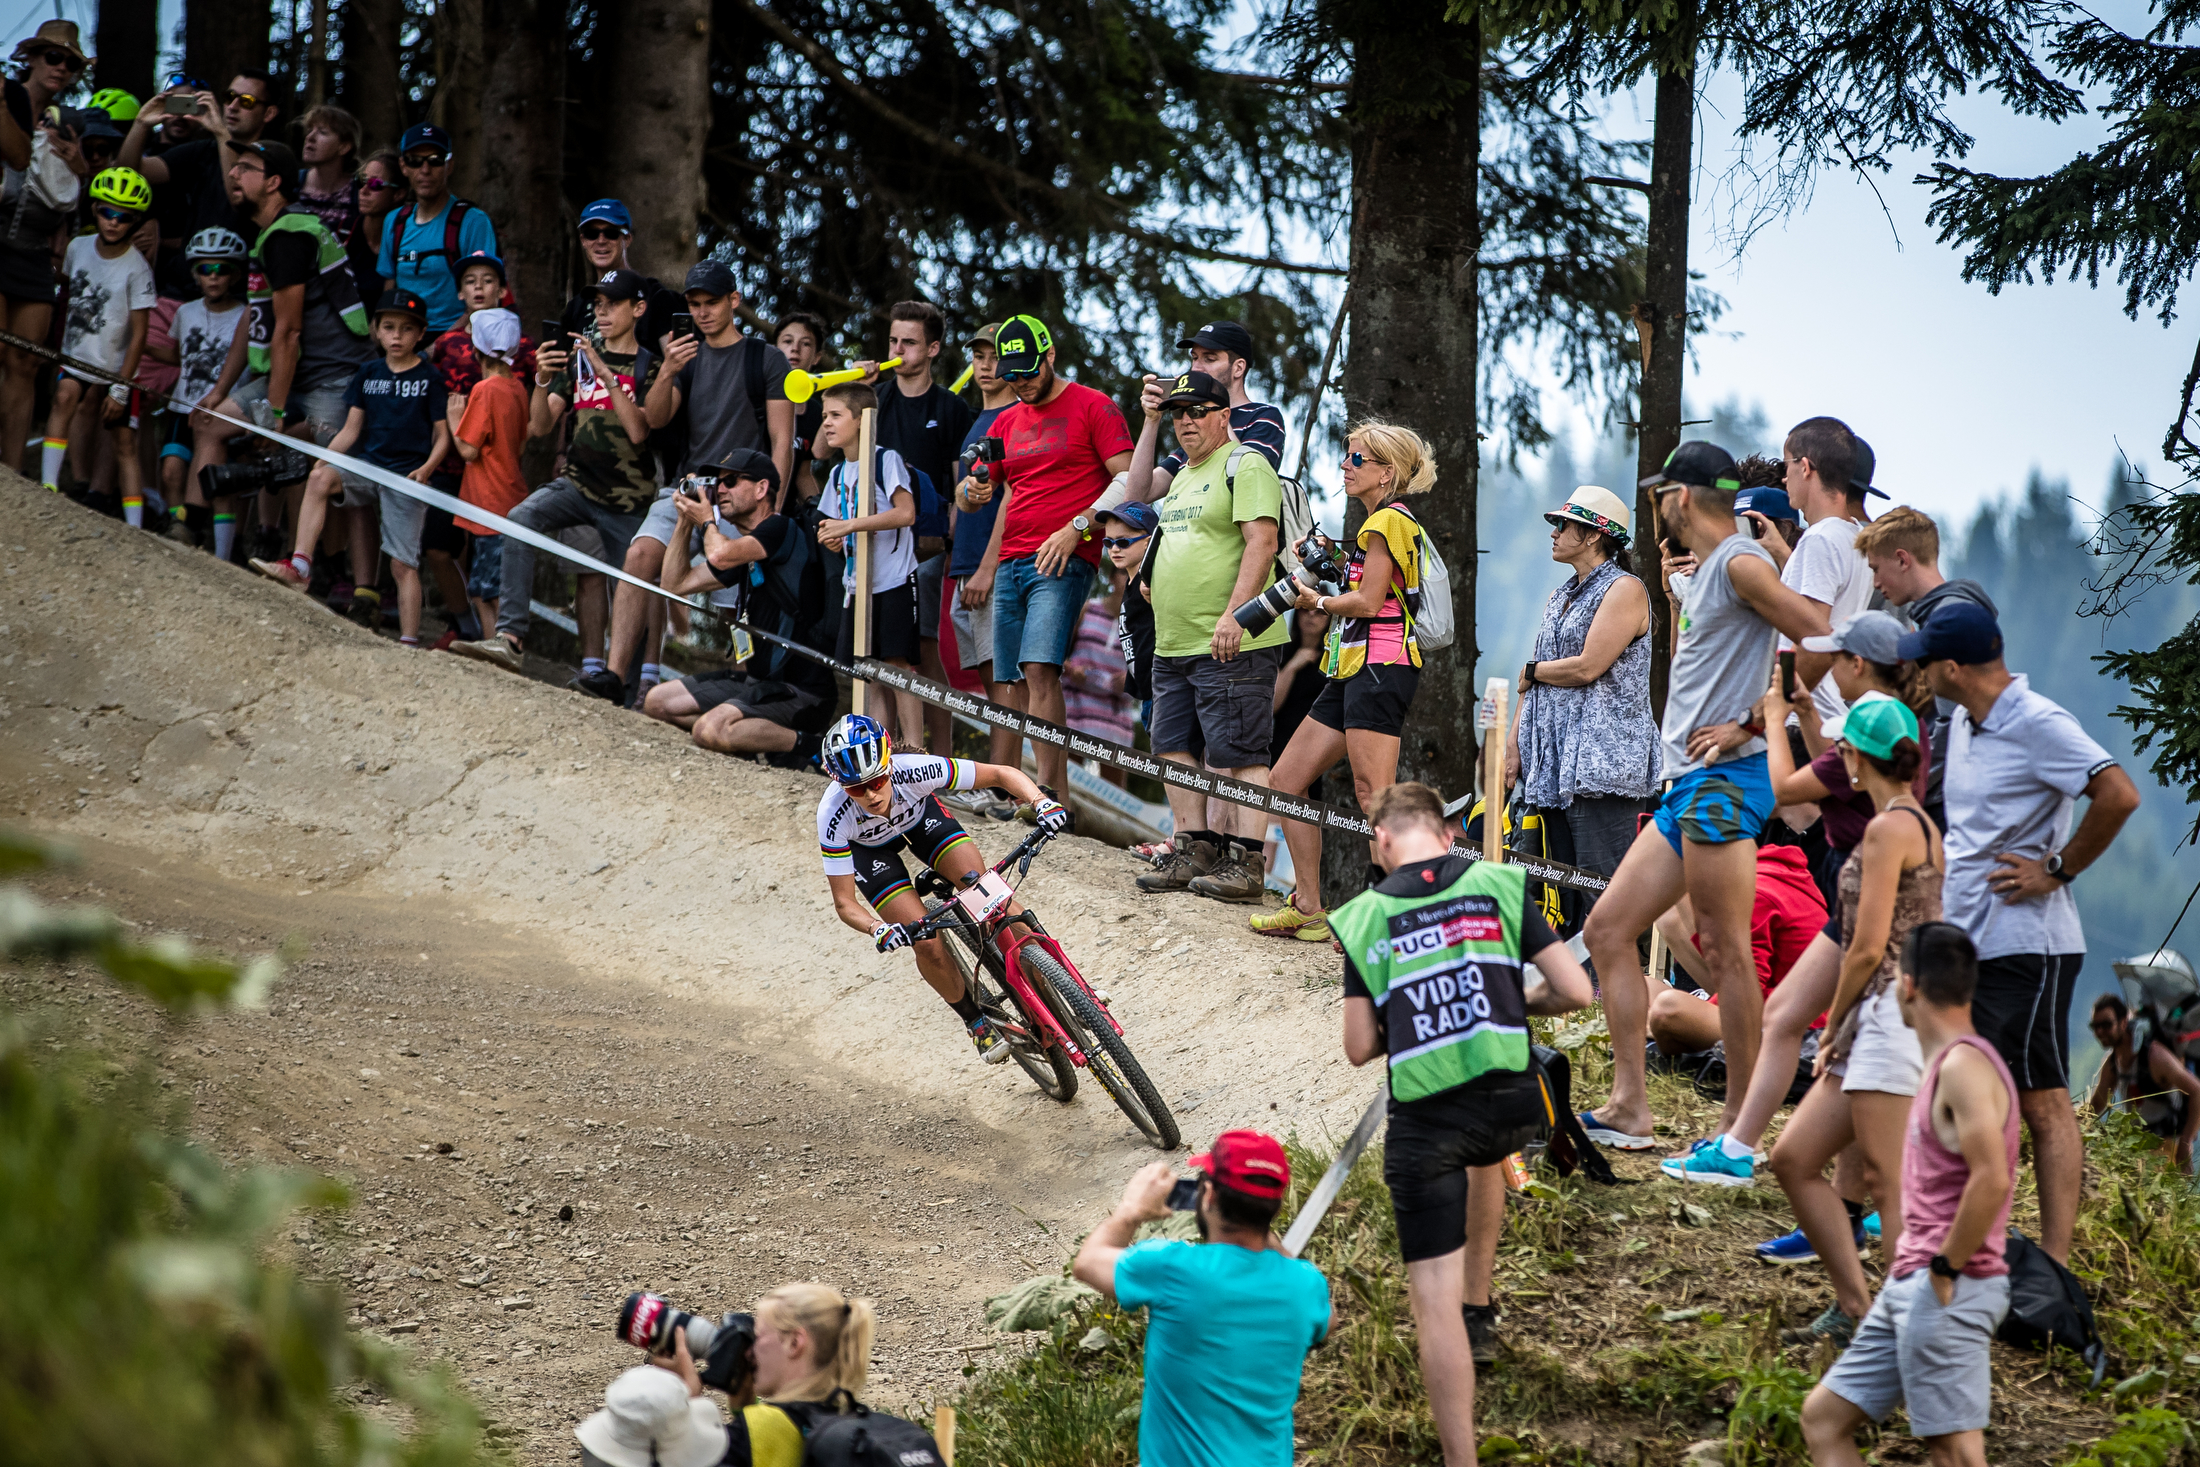 Kate Courtney cruises through a berm, giving the lungs a quick break.